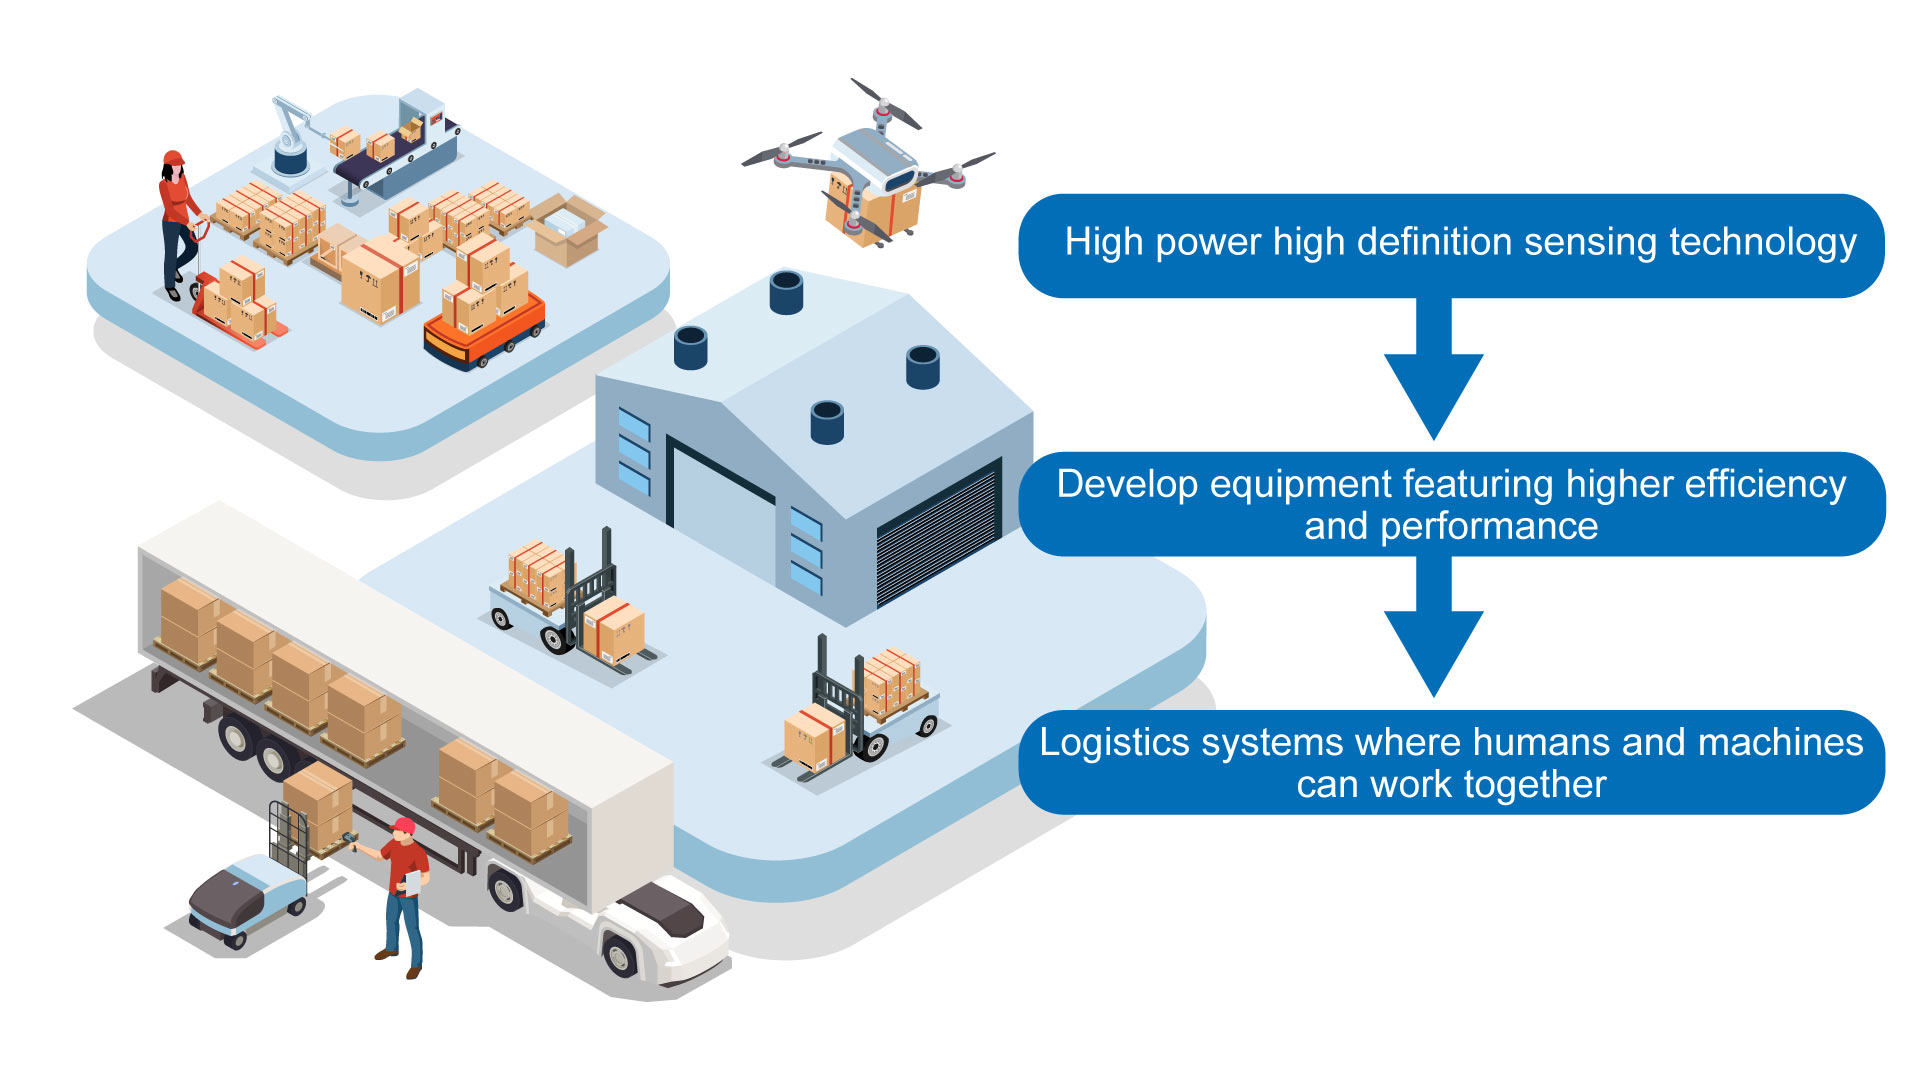 Logistics systems where humans and machines work together